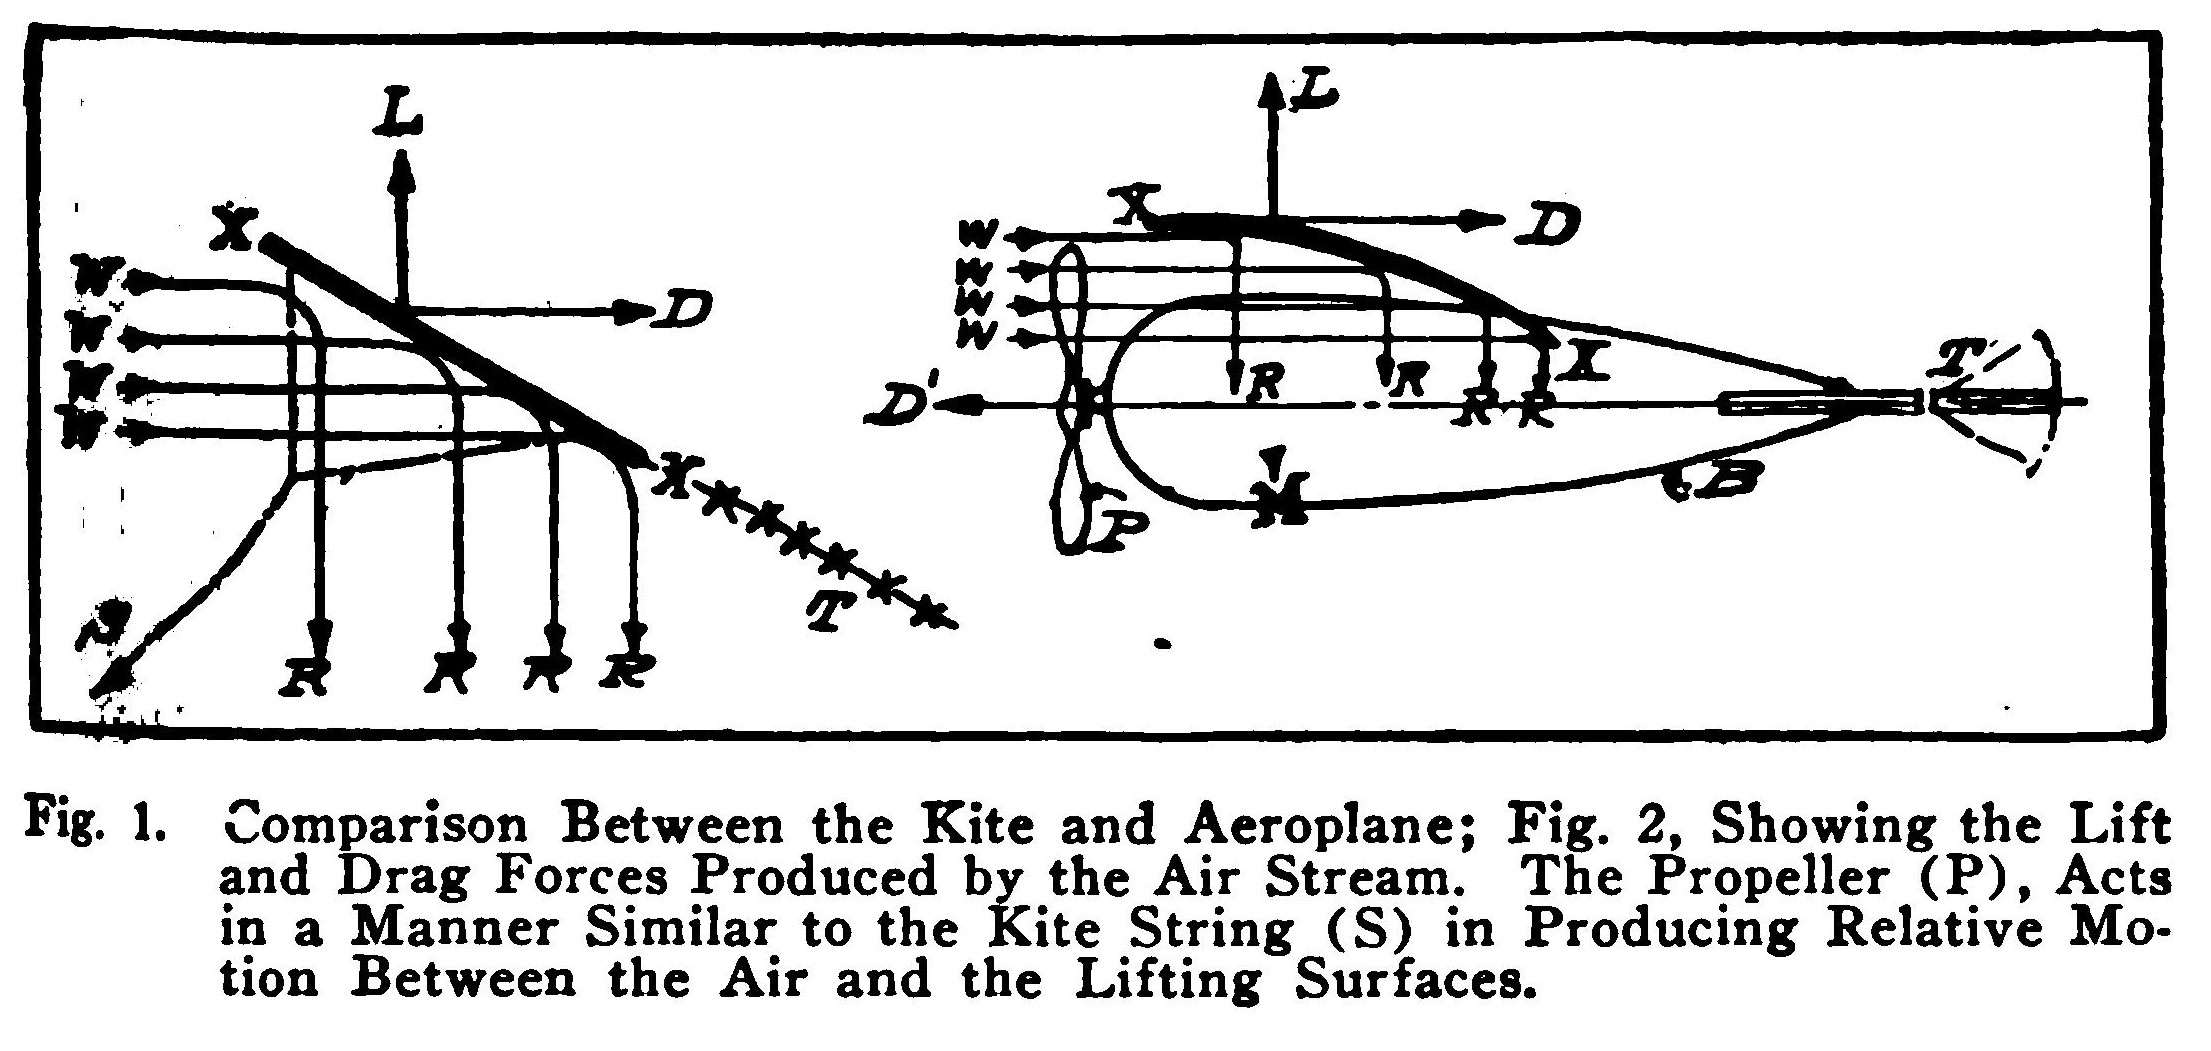 Fig. 1. Comparison Between the Kite and Aeroplane; Fig. 2, Showing the Lift and Drag Forces Produced by the Air Stream.